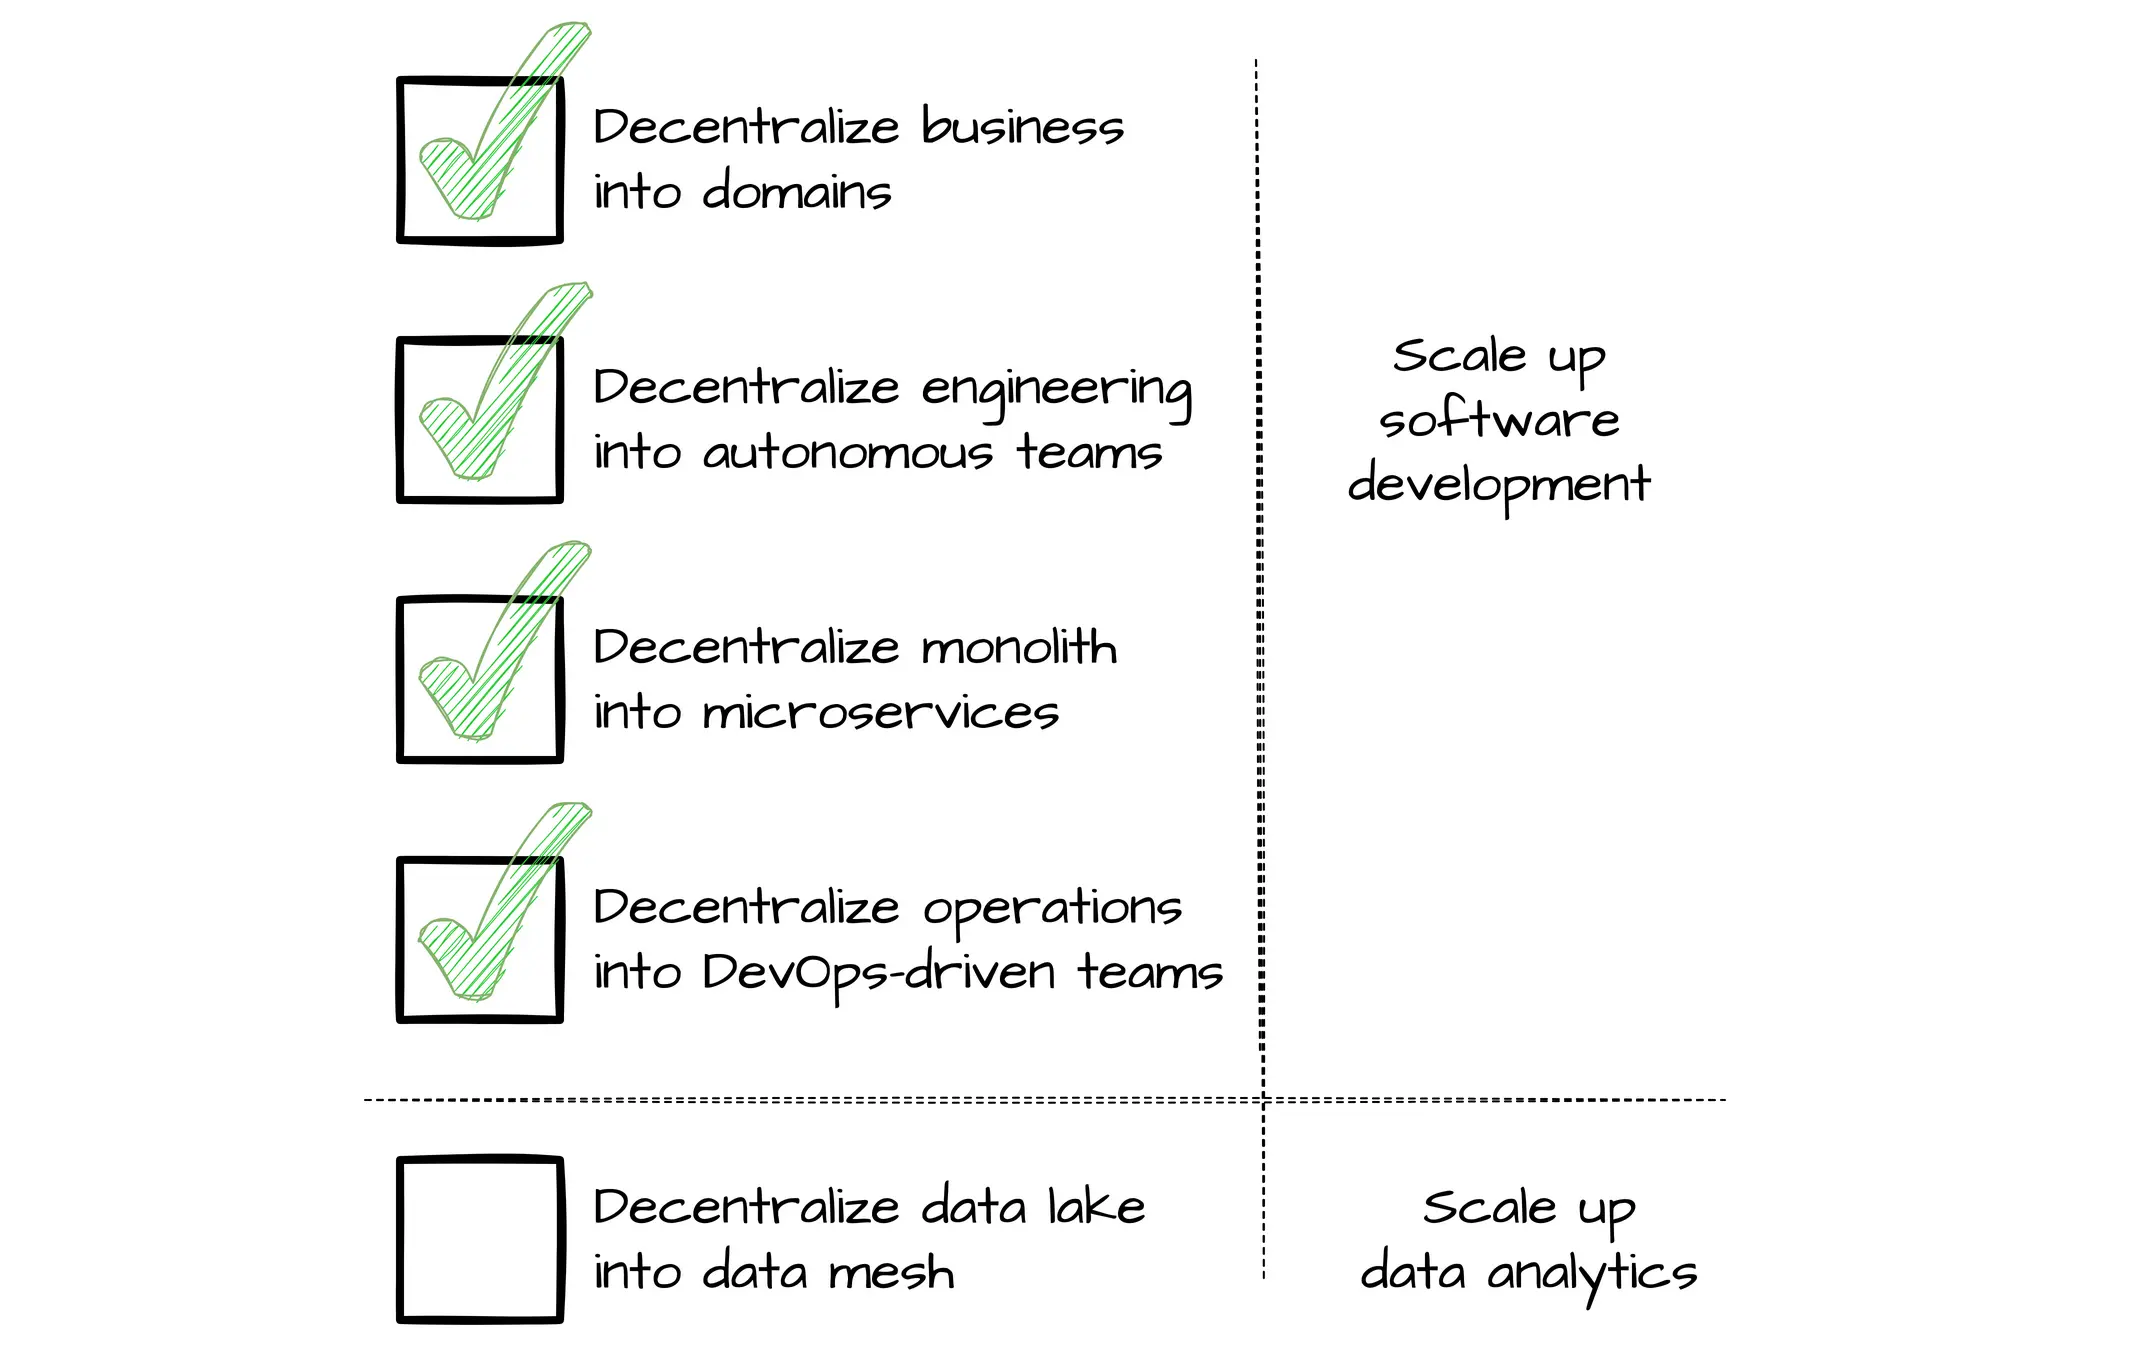 You already scaled up your software development by: 1. Decentralize business into domains; 2. Decentralize engineering into autonomous teams; 3. Decentralize monolith into microservices; 4. Decentralize operations into DevOps teams. Next step: scale up data analytics by decentralizing data lake into data mesh